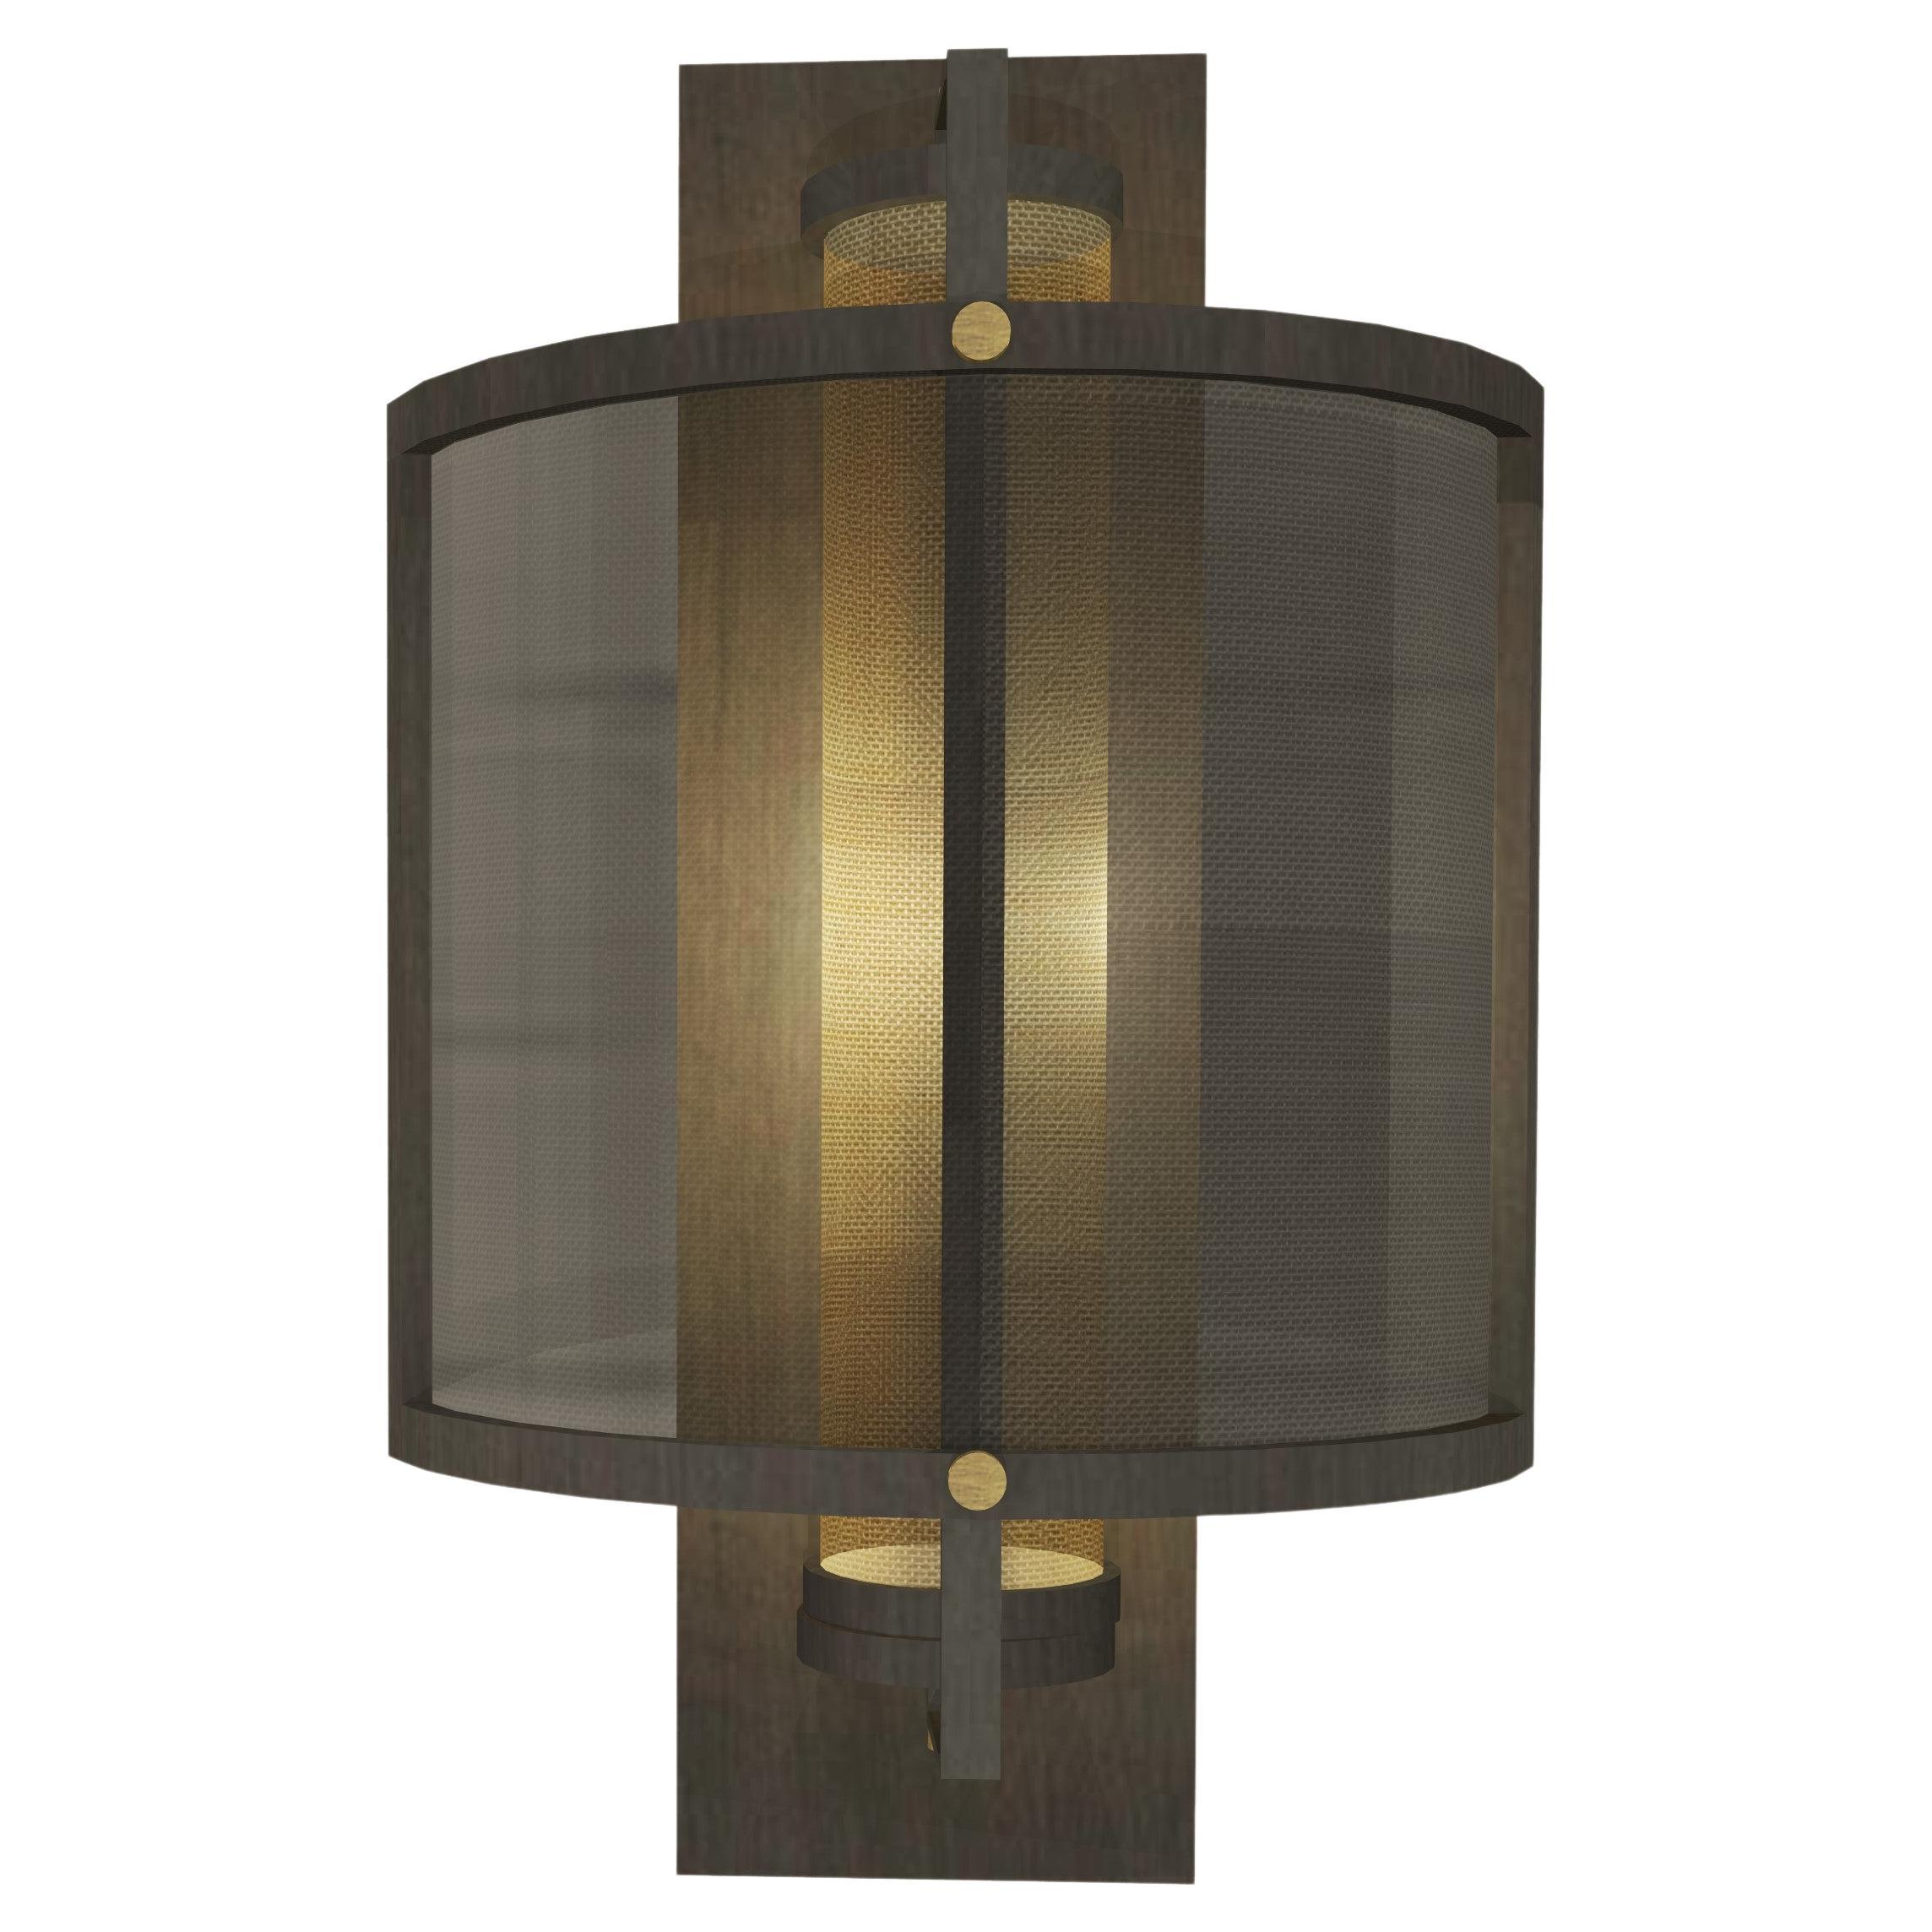 Imagin Industrial Wall Light in Antique Bronze and Antique Brass For Sale